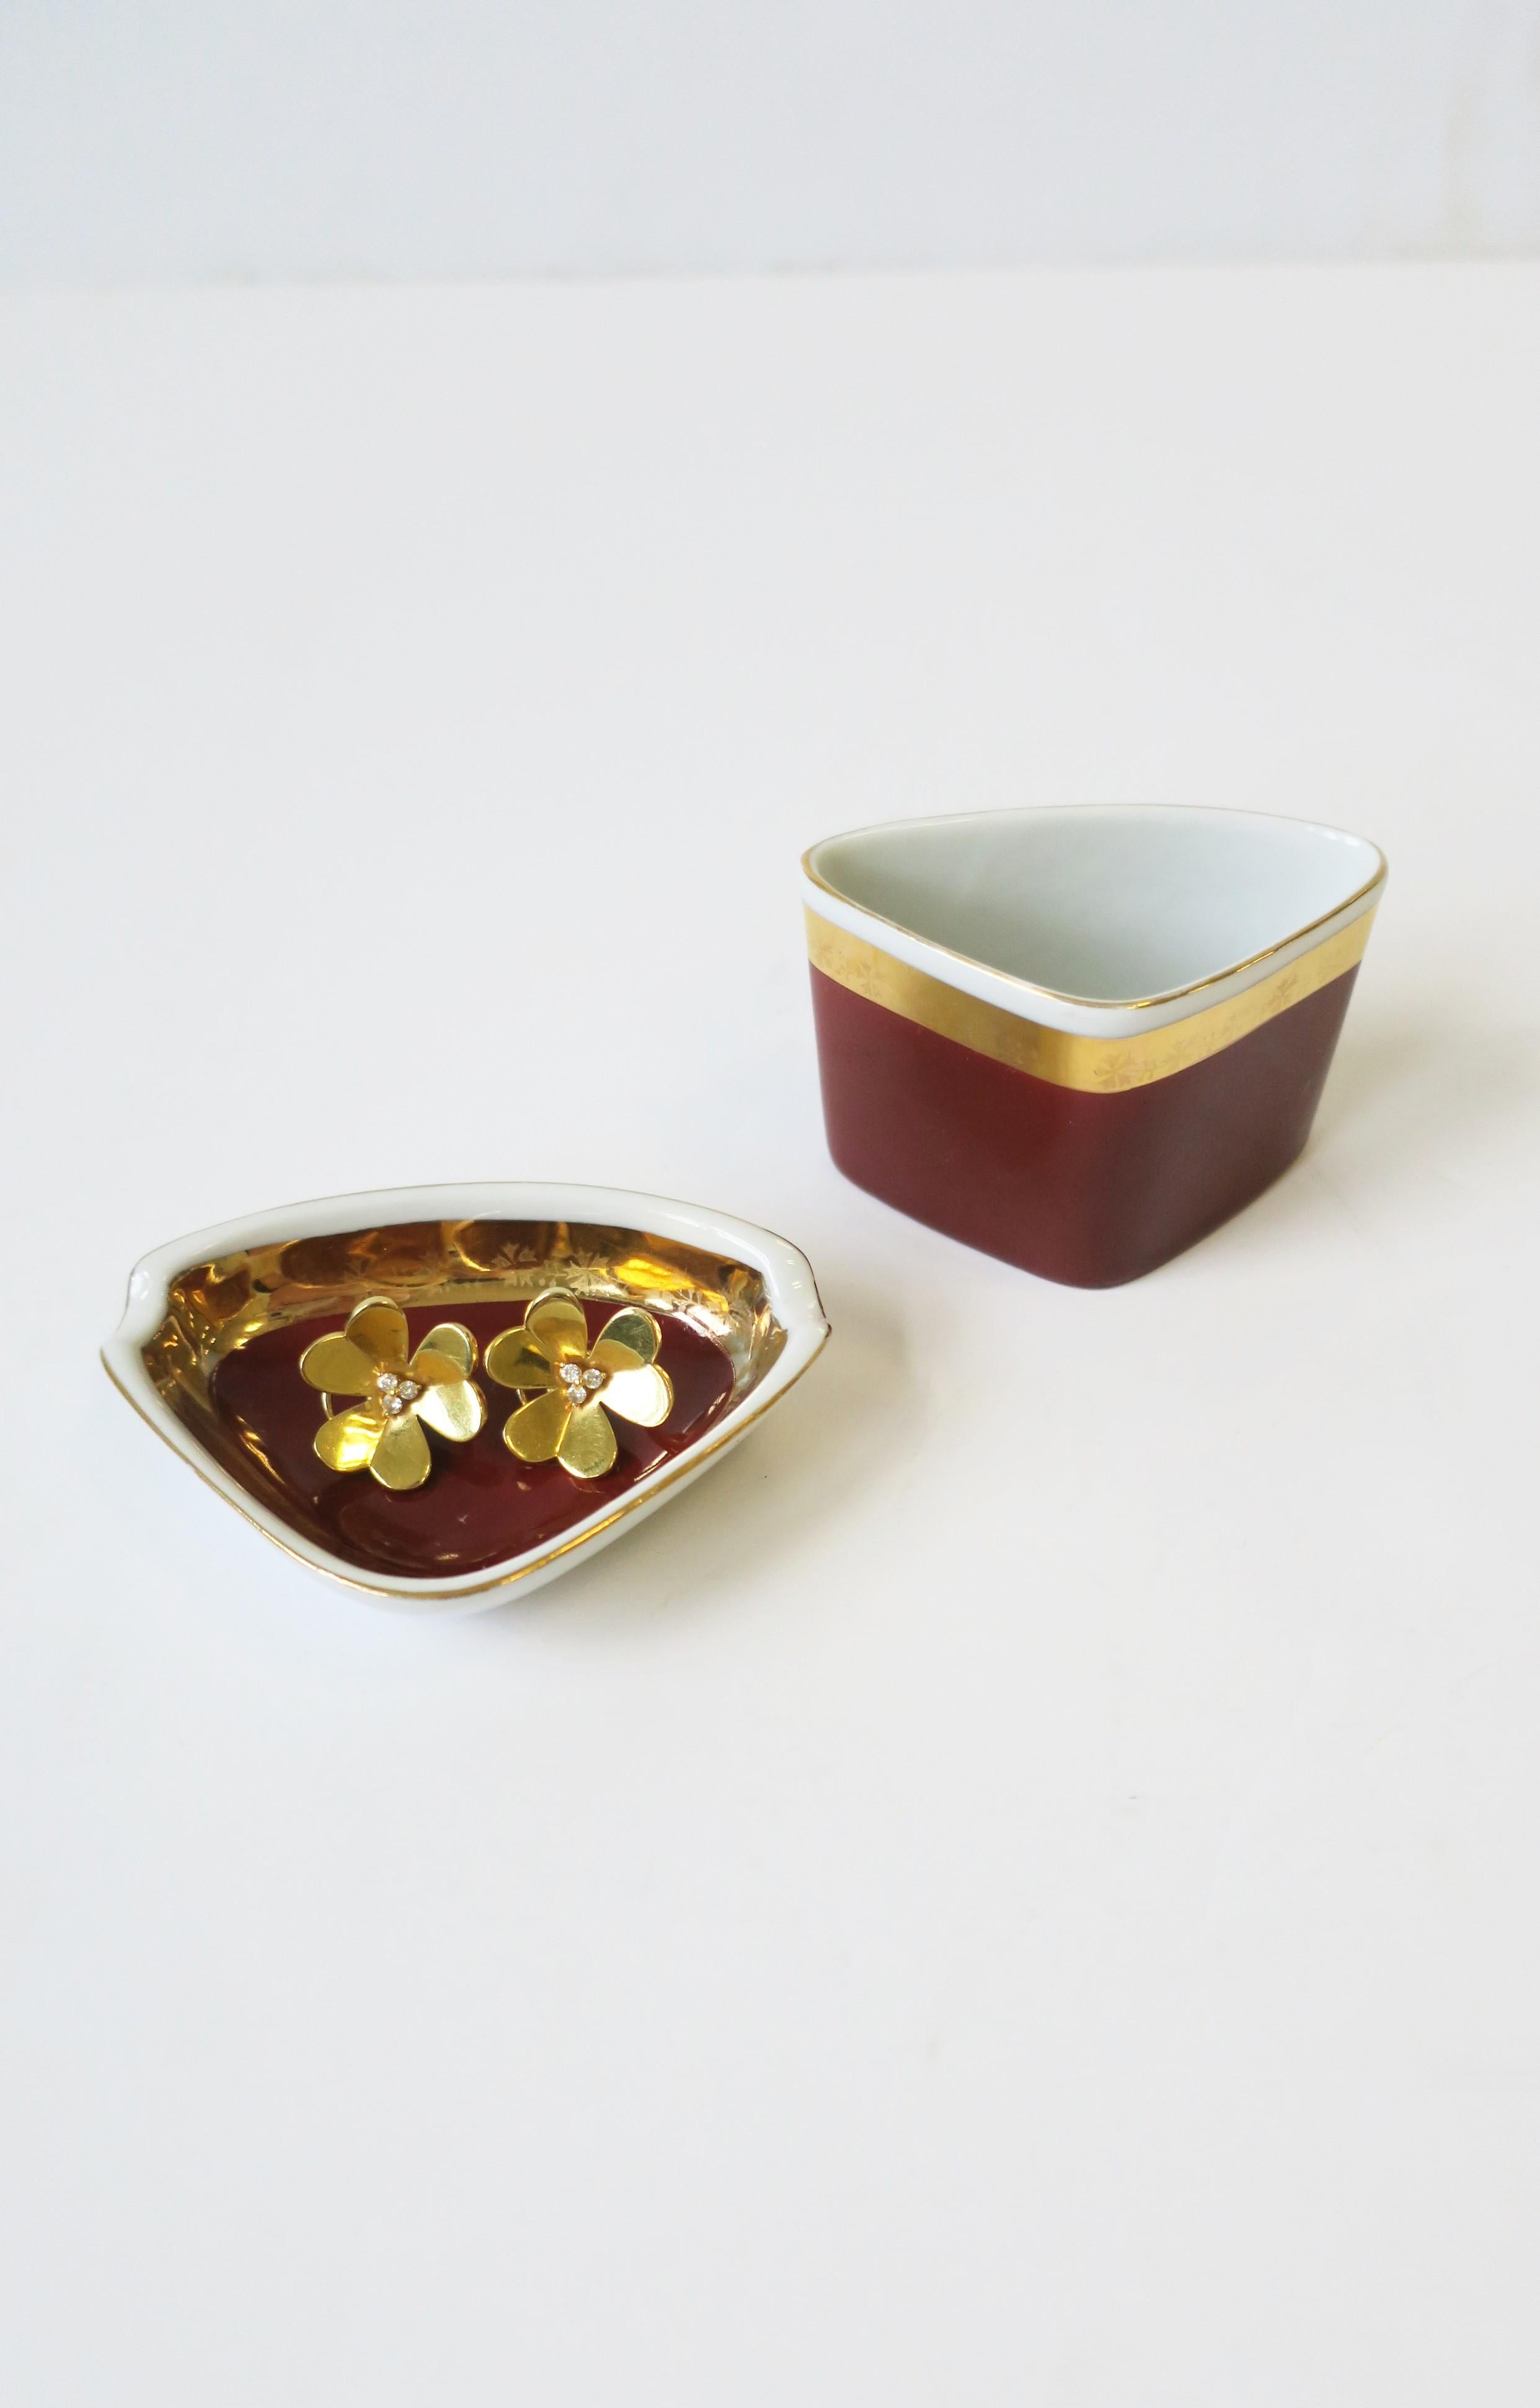 Midcentury Modern Porcelain Ashtray and Cigarette Holder Set from Hungary In Good Condition For Sale In New York, NY